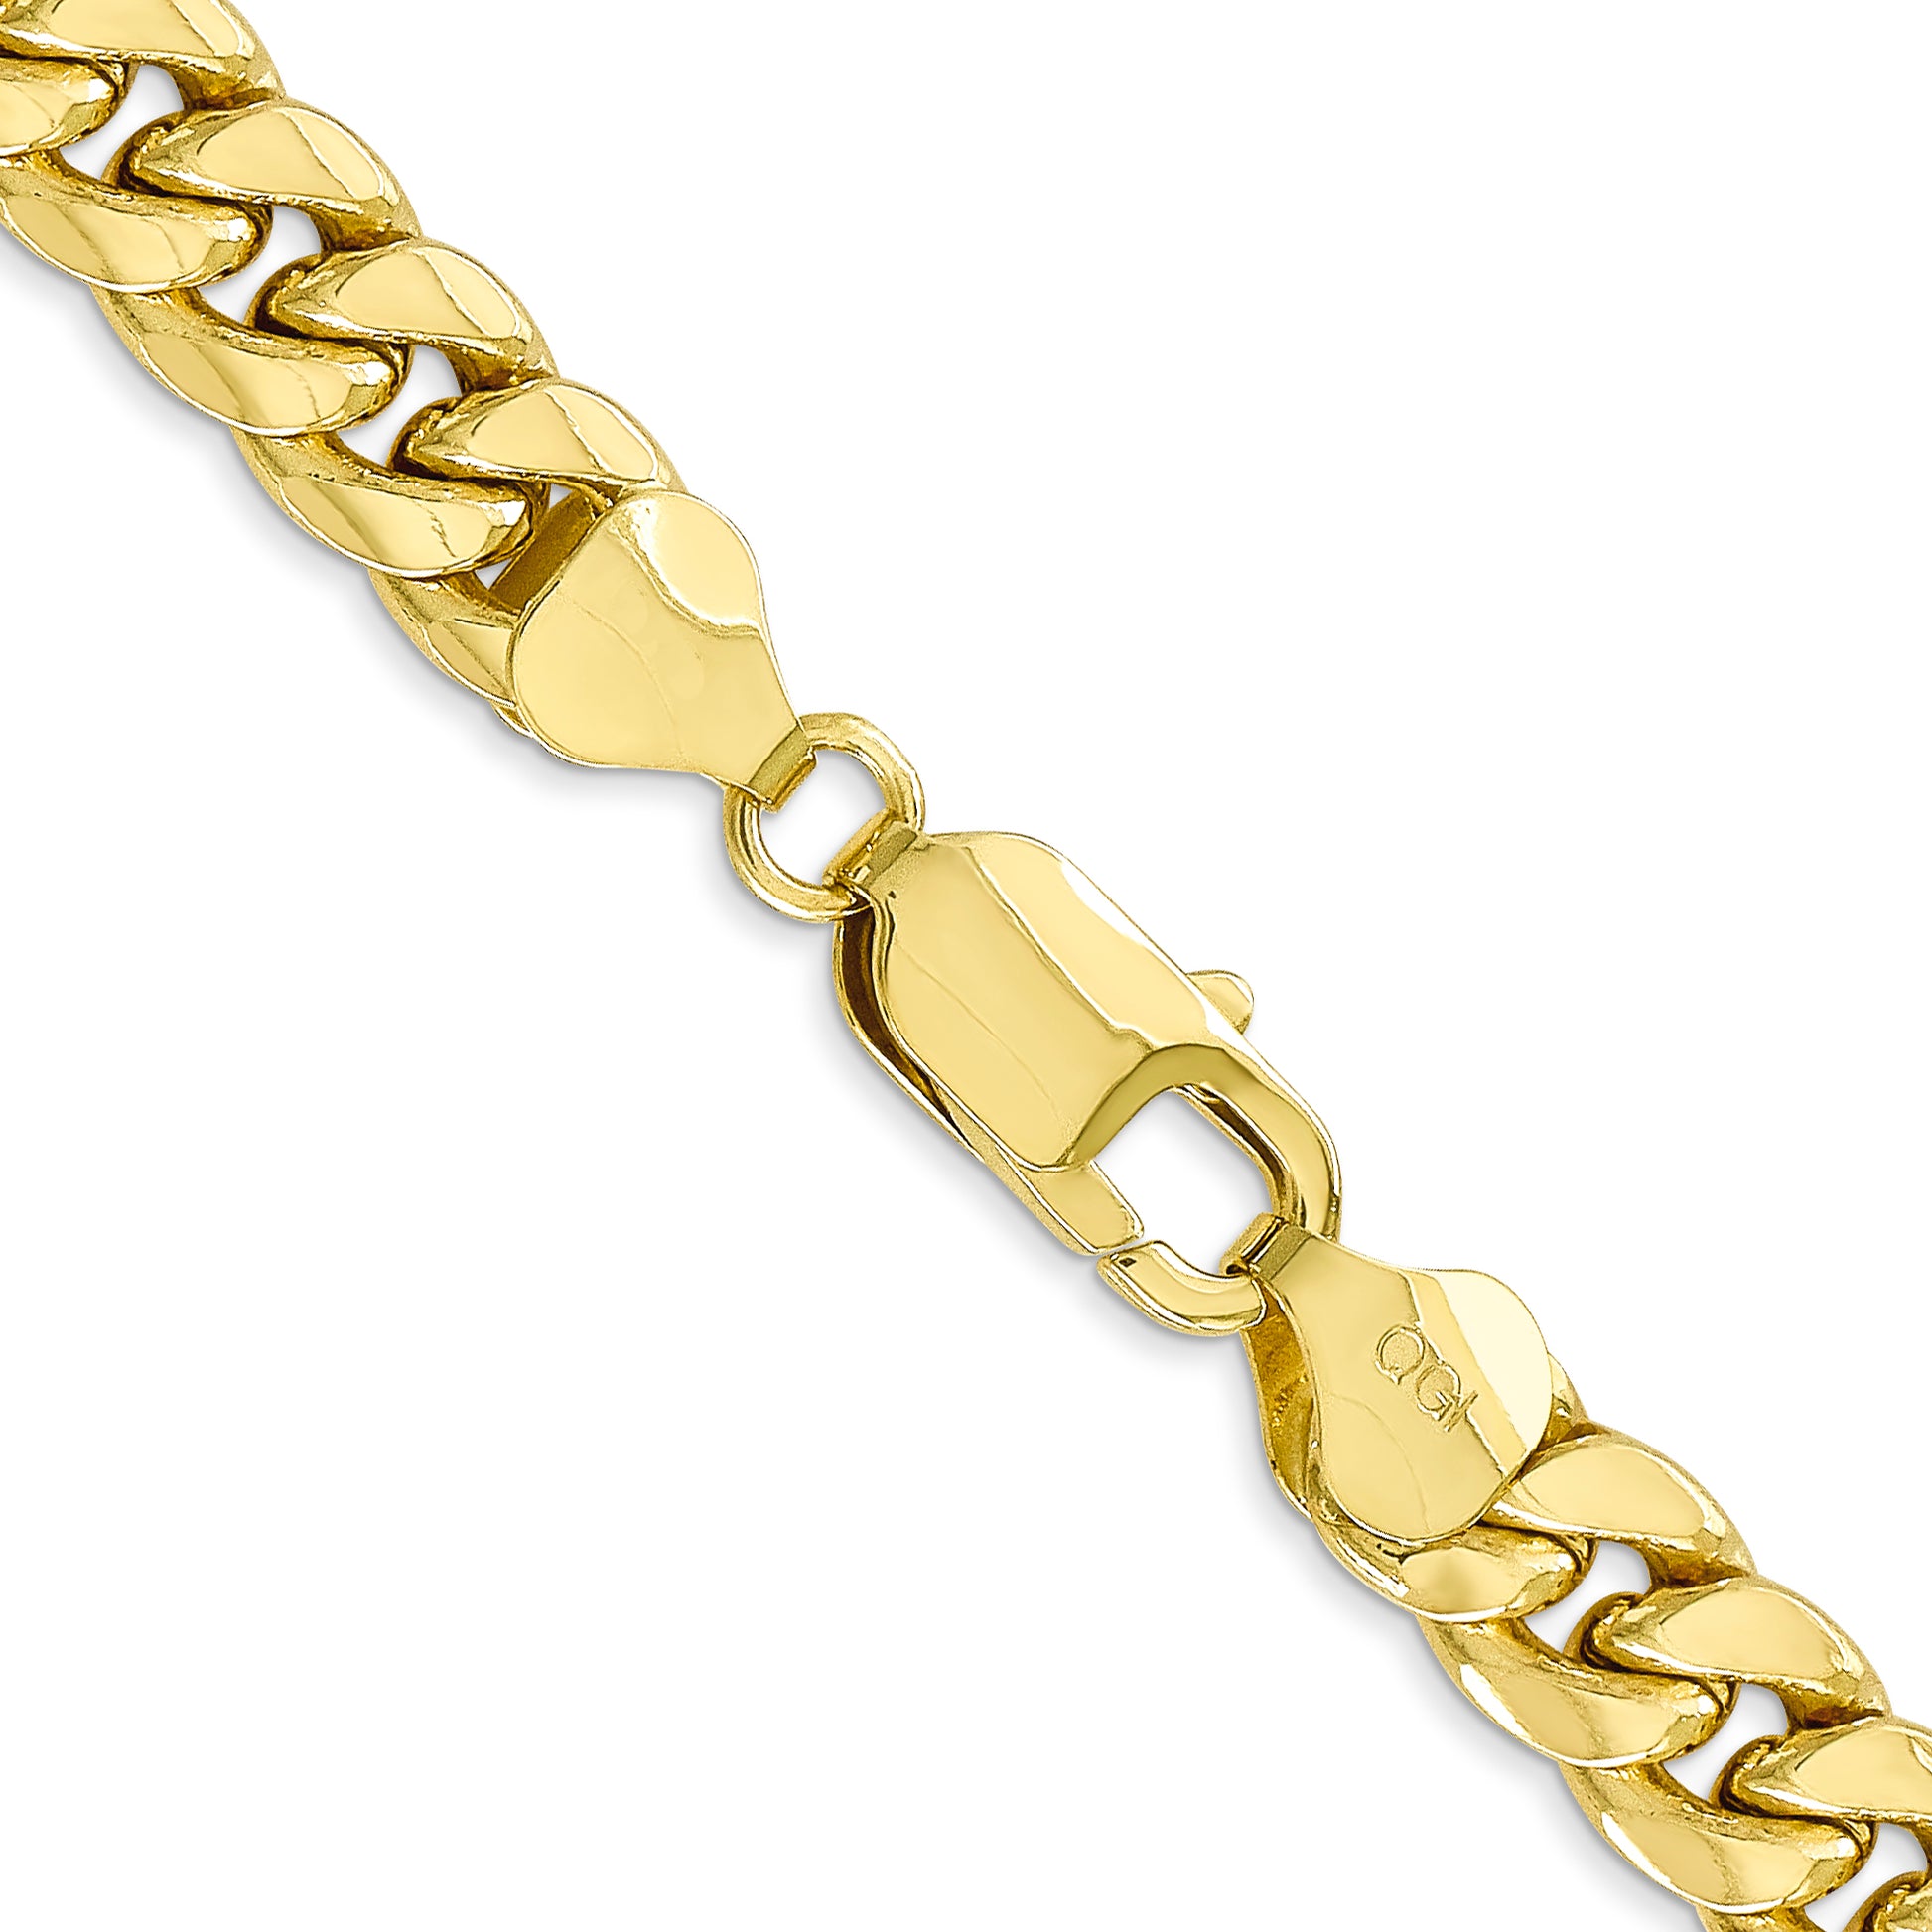 10K Gold 4mm Flat Curb Chain 20 Inches